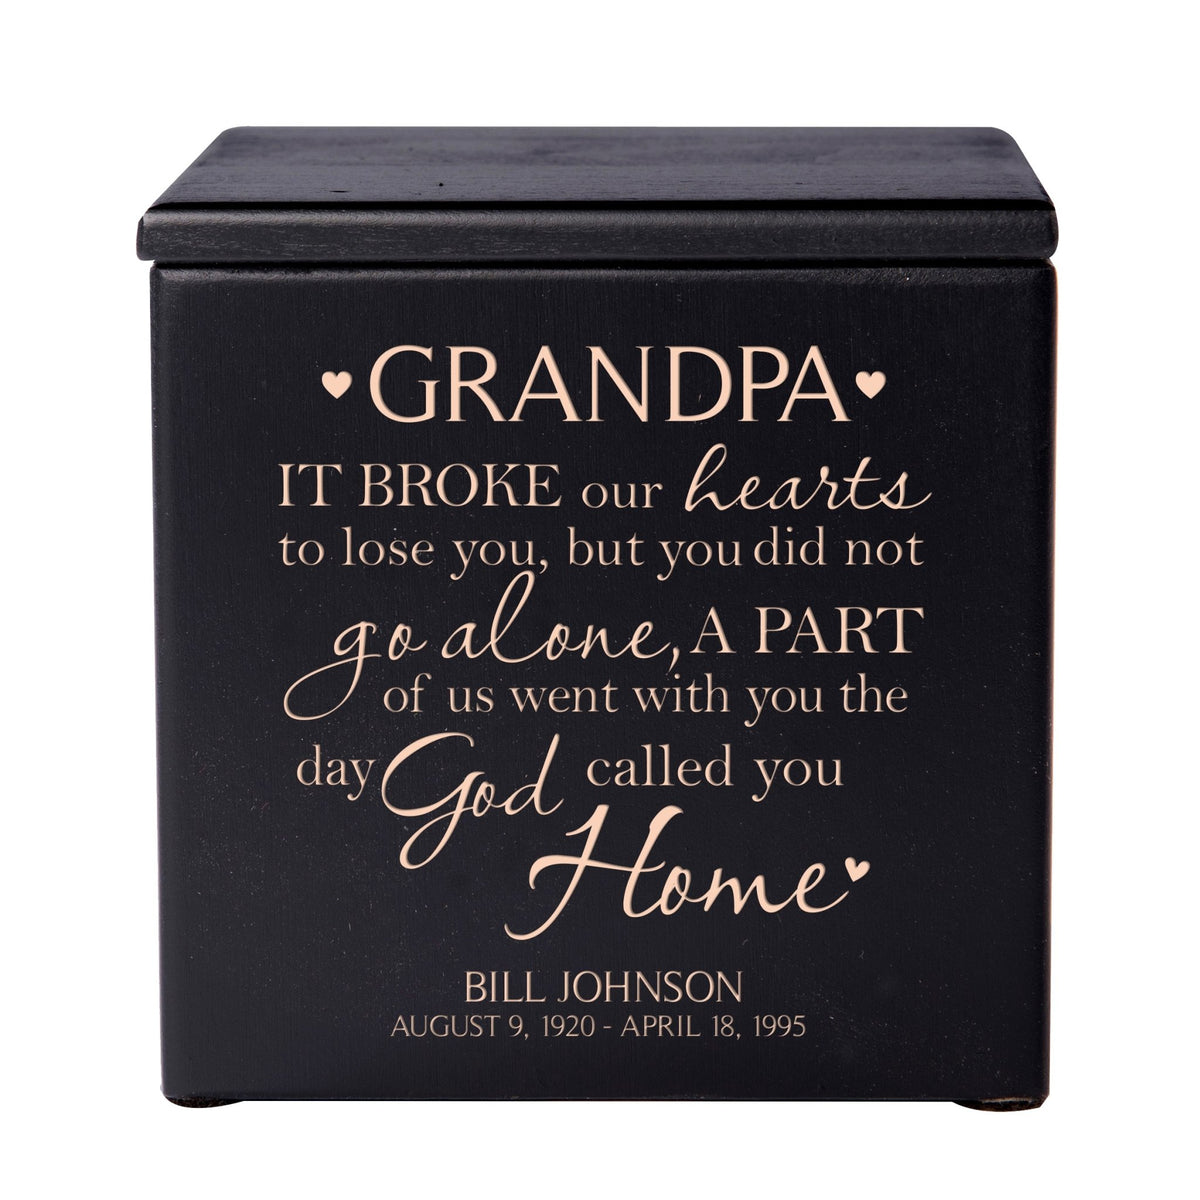 Custom Engraved Memorial Cremation Urn Box Holds 49 Cu Inches Of Human Ashes (It Broke Our Hearts Grandpa) Funeral and Condolence Keepsake - LifeSong Milestones